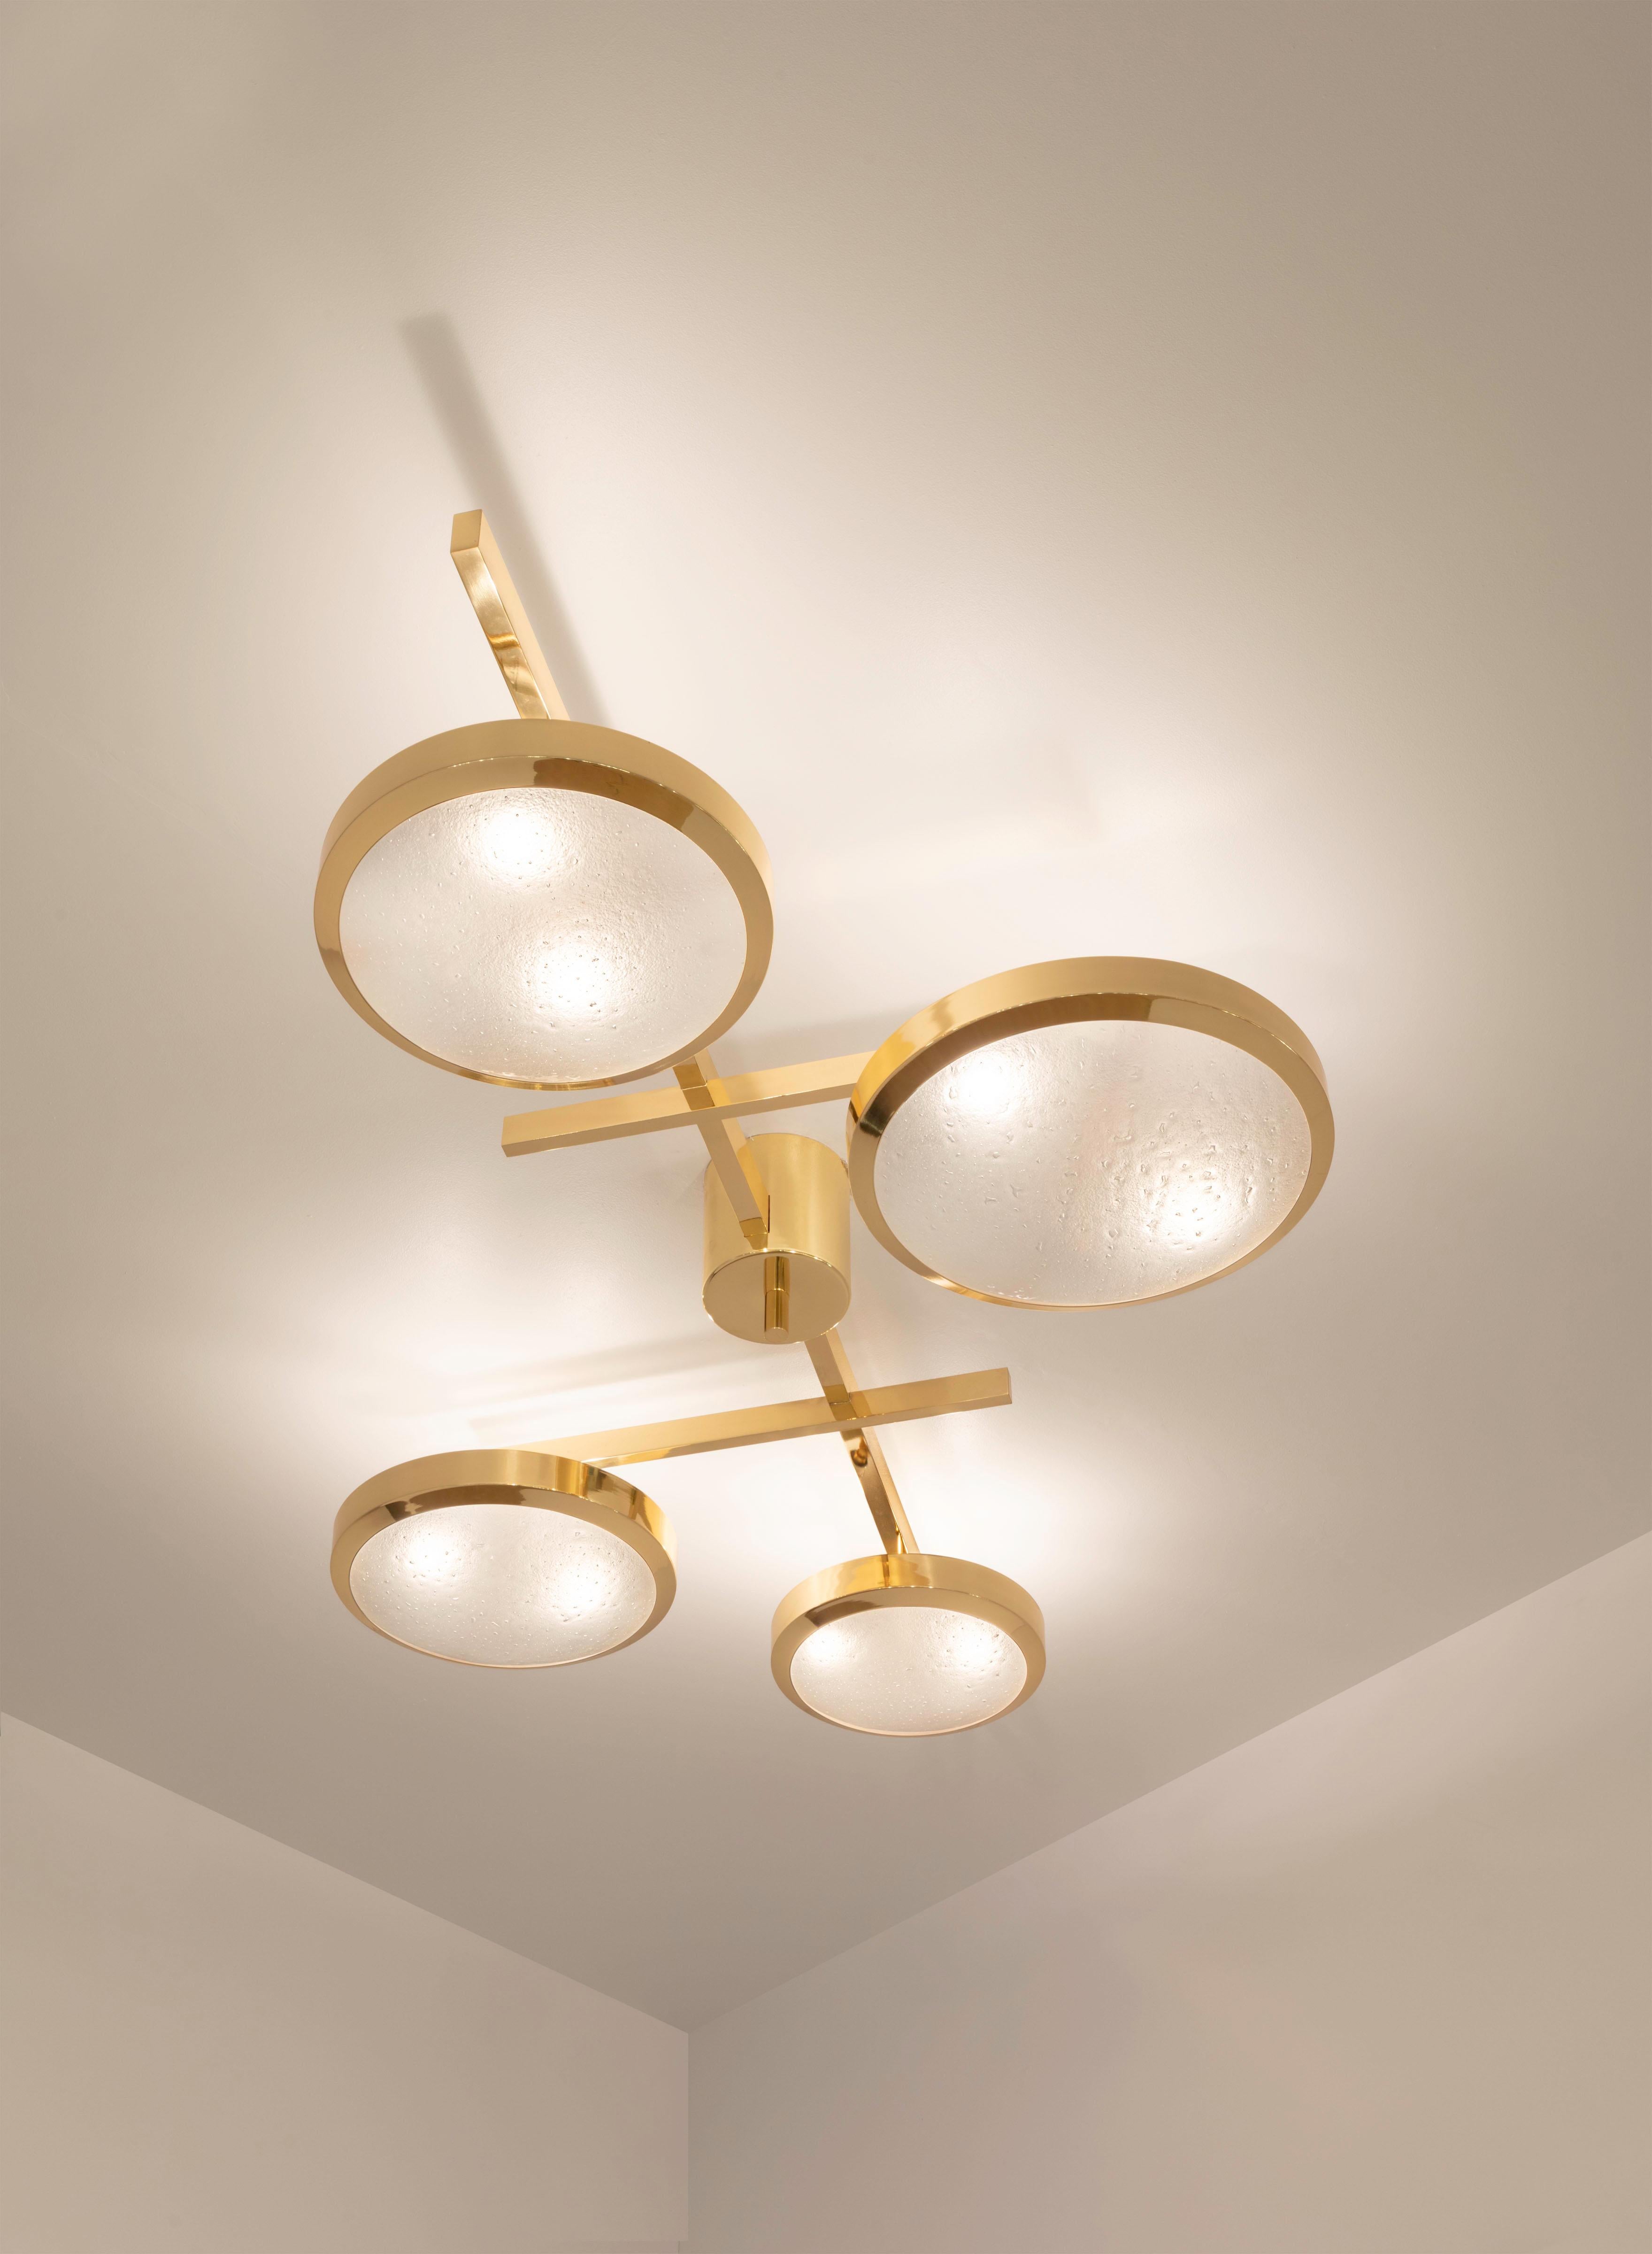 Tetrix Ceiling Light by Gaspare Asaro - Satin Brass Finish For Sale 3